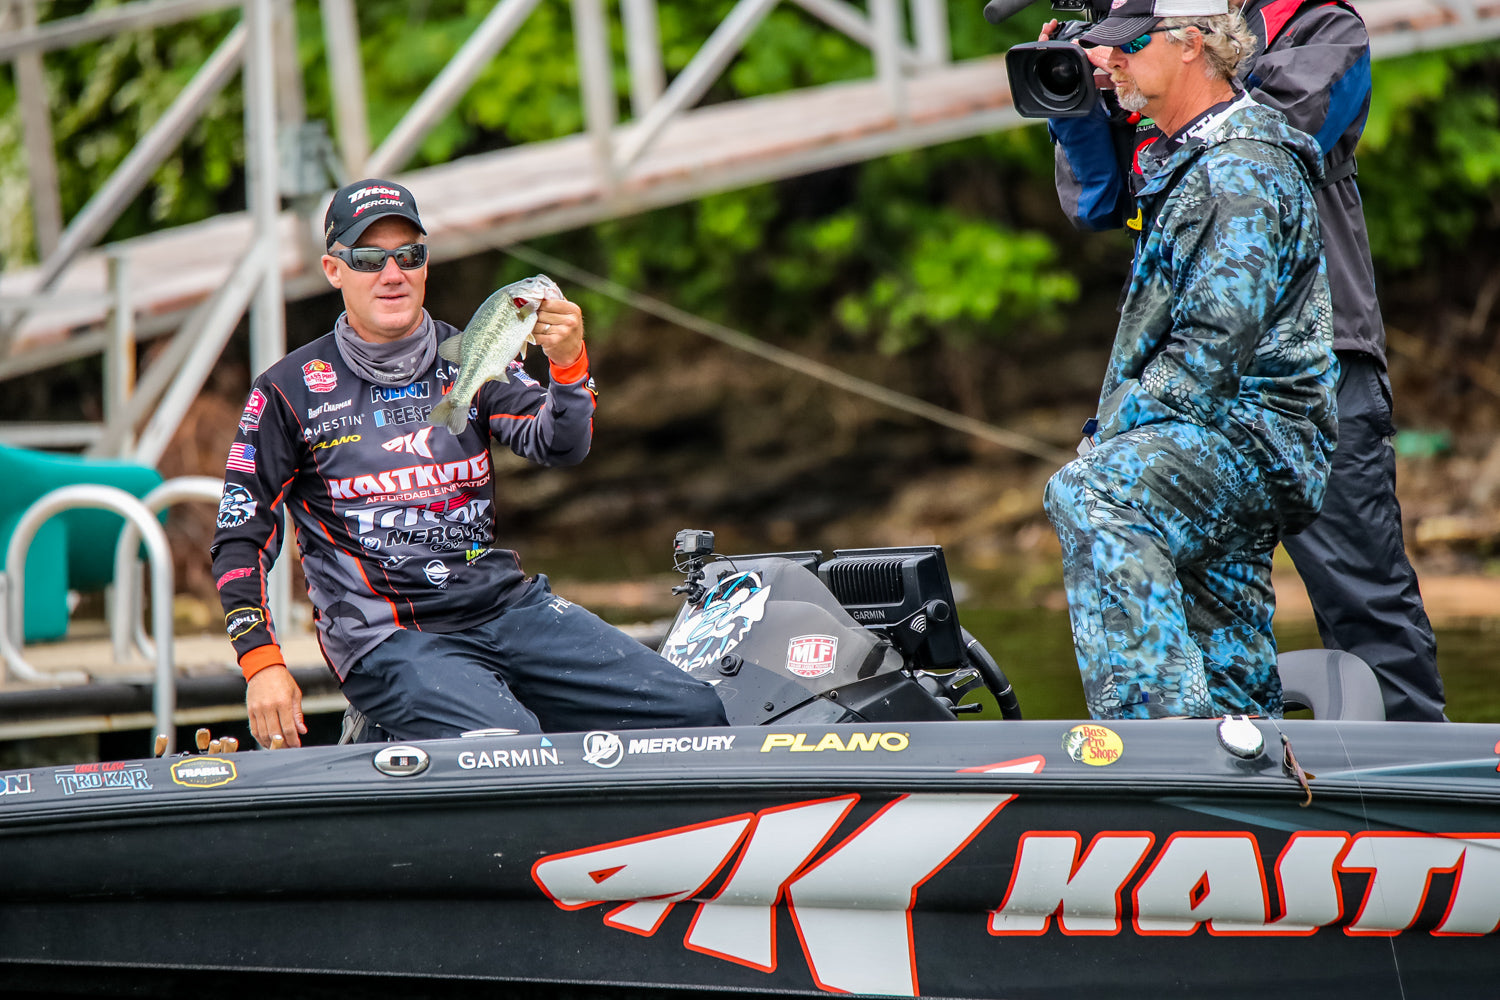 What Fishing Rods Does Major League Fishing Pro Brent Chapman Use